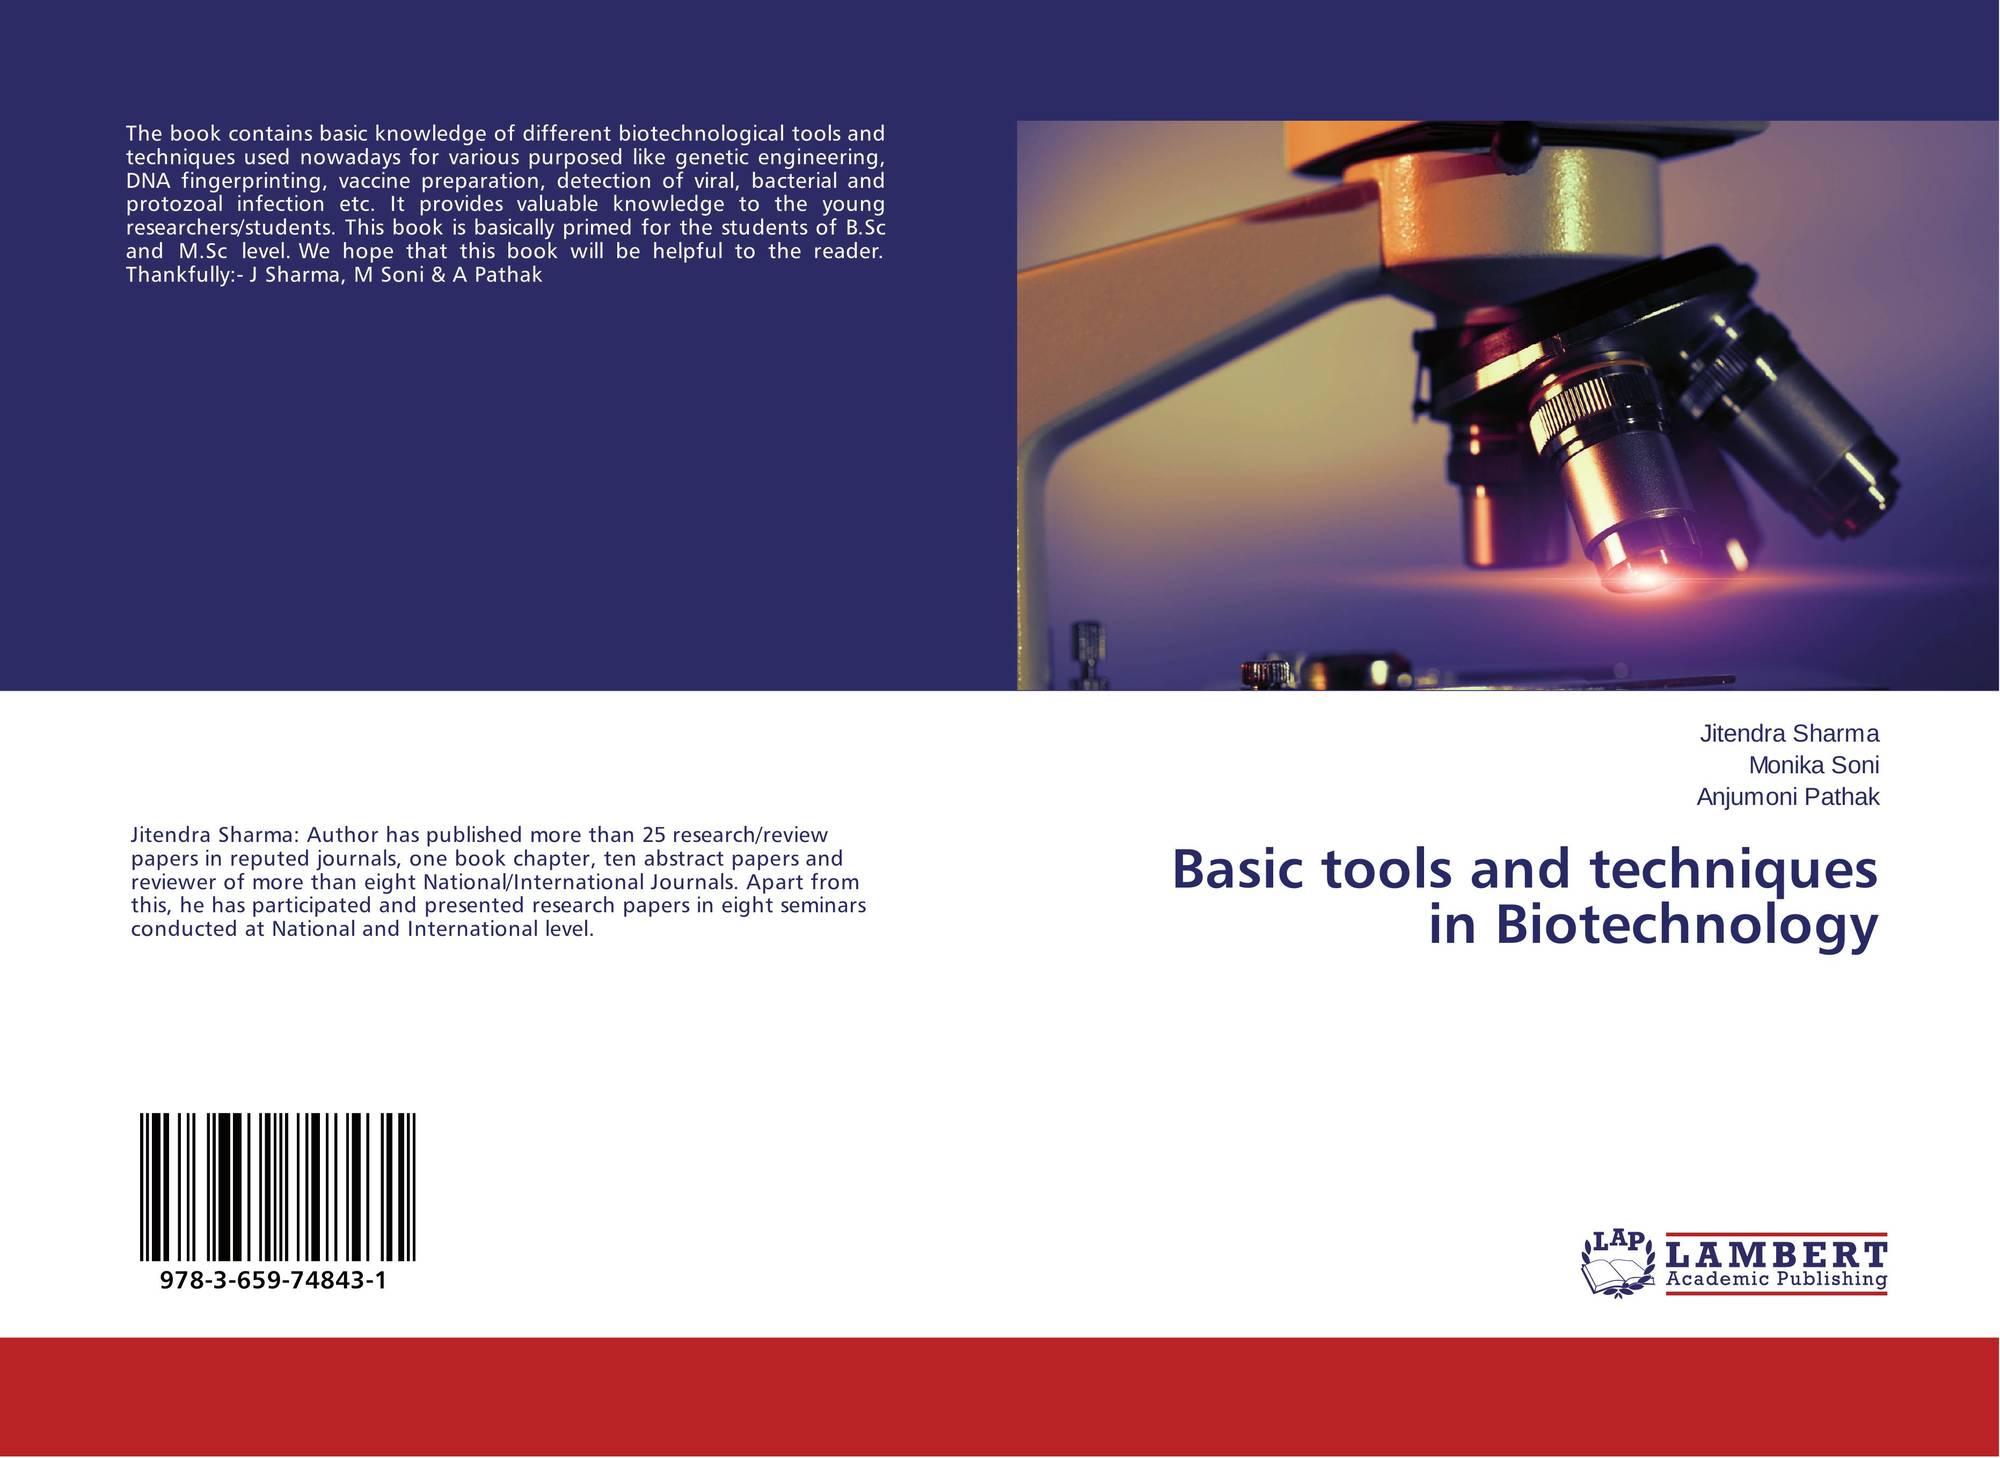 Basic tools and techniques in Biotechnology, 9783659748431